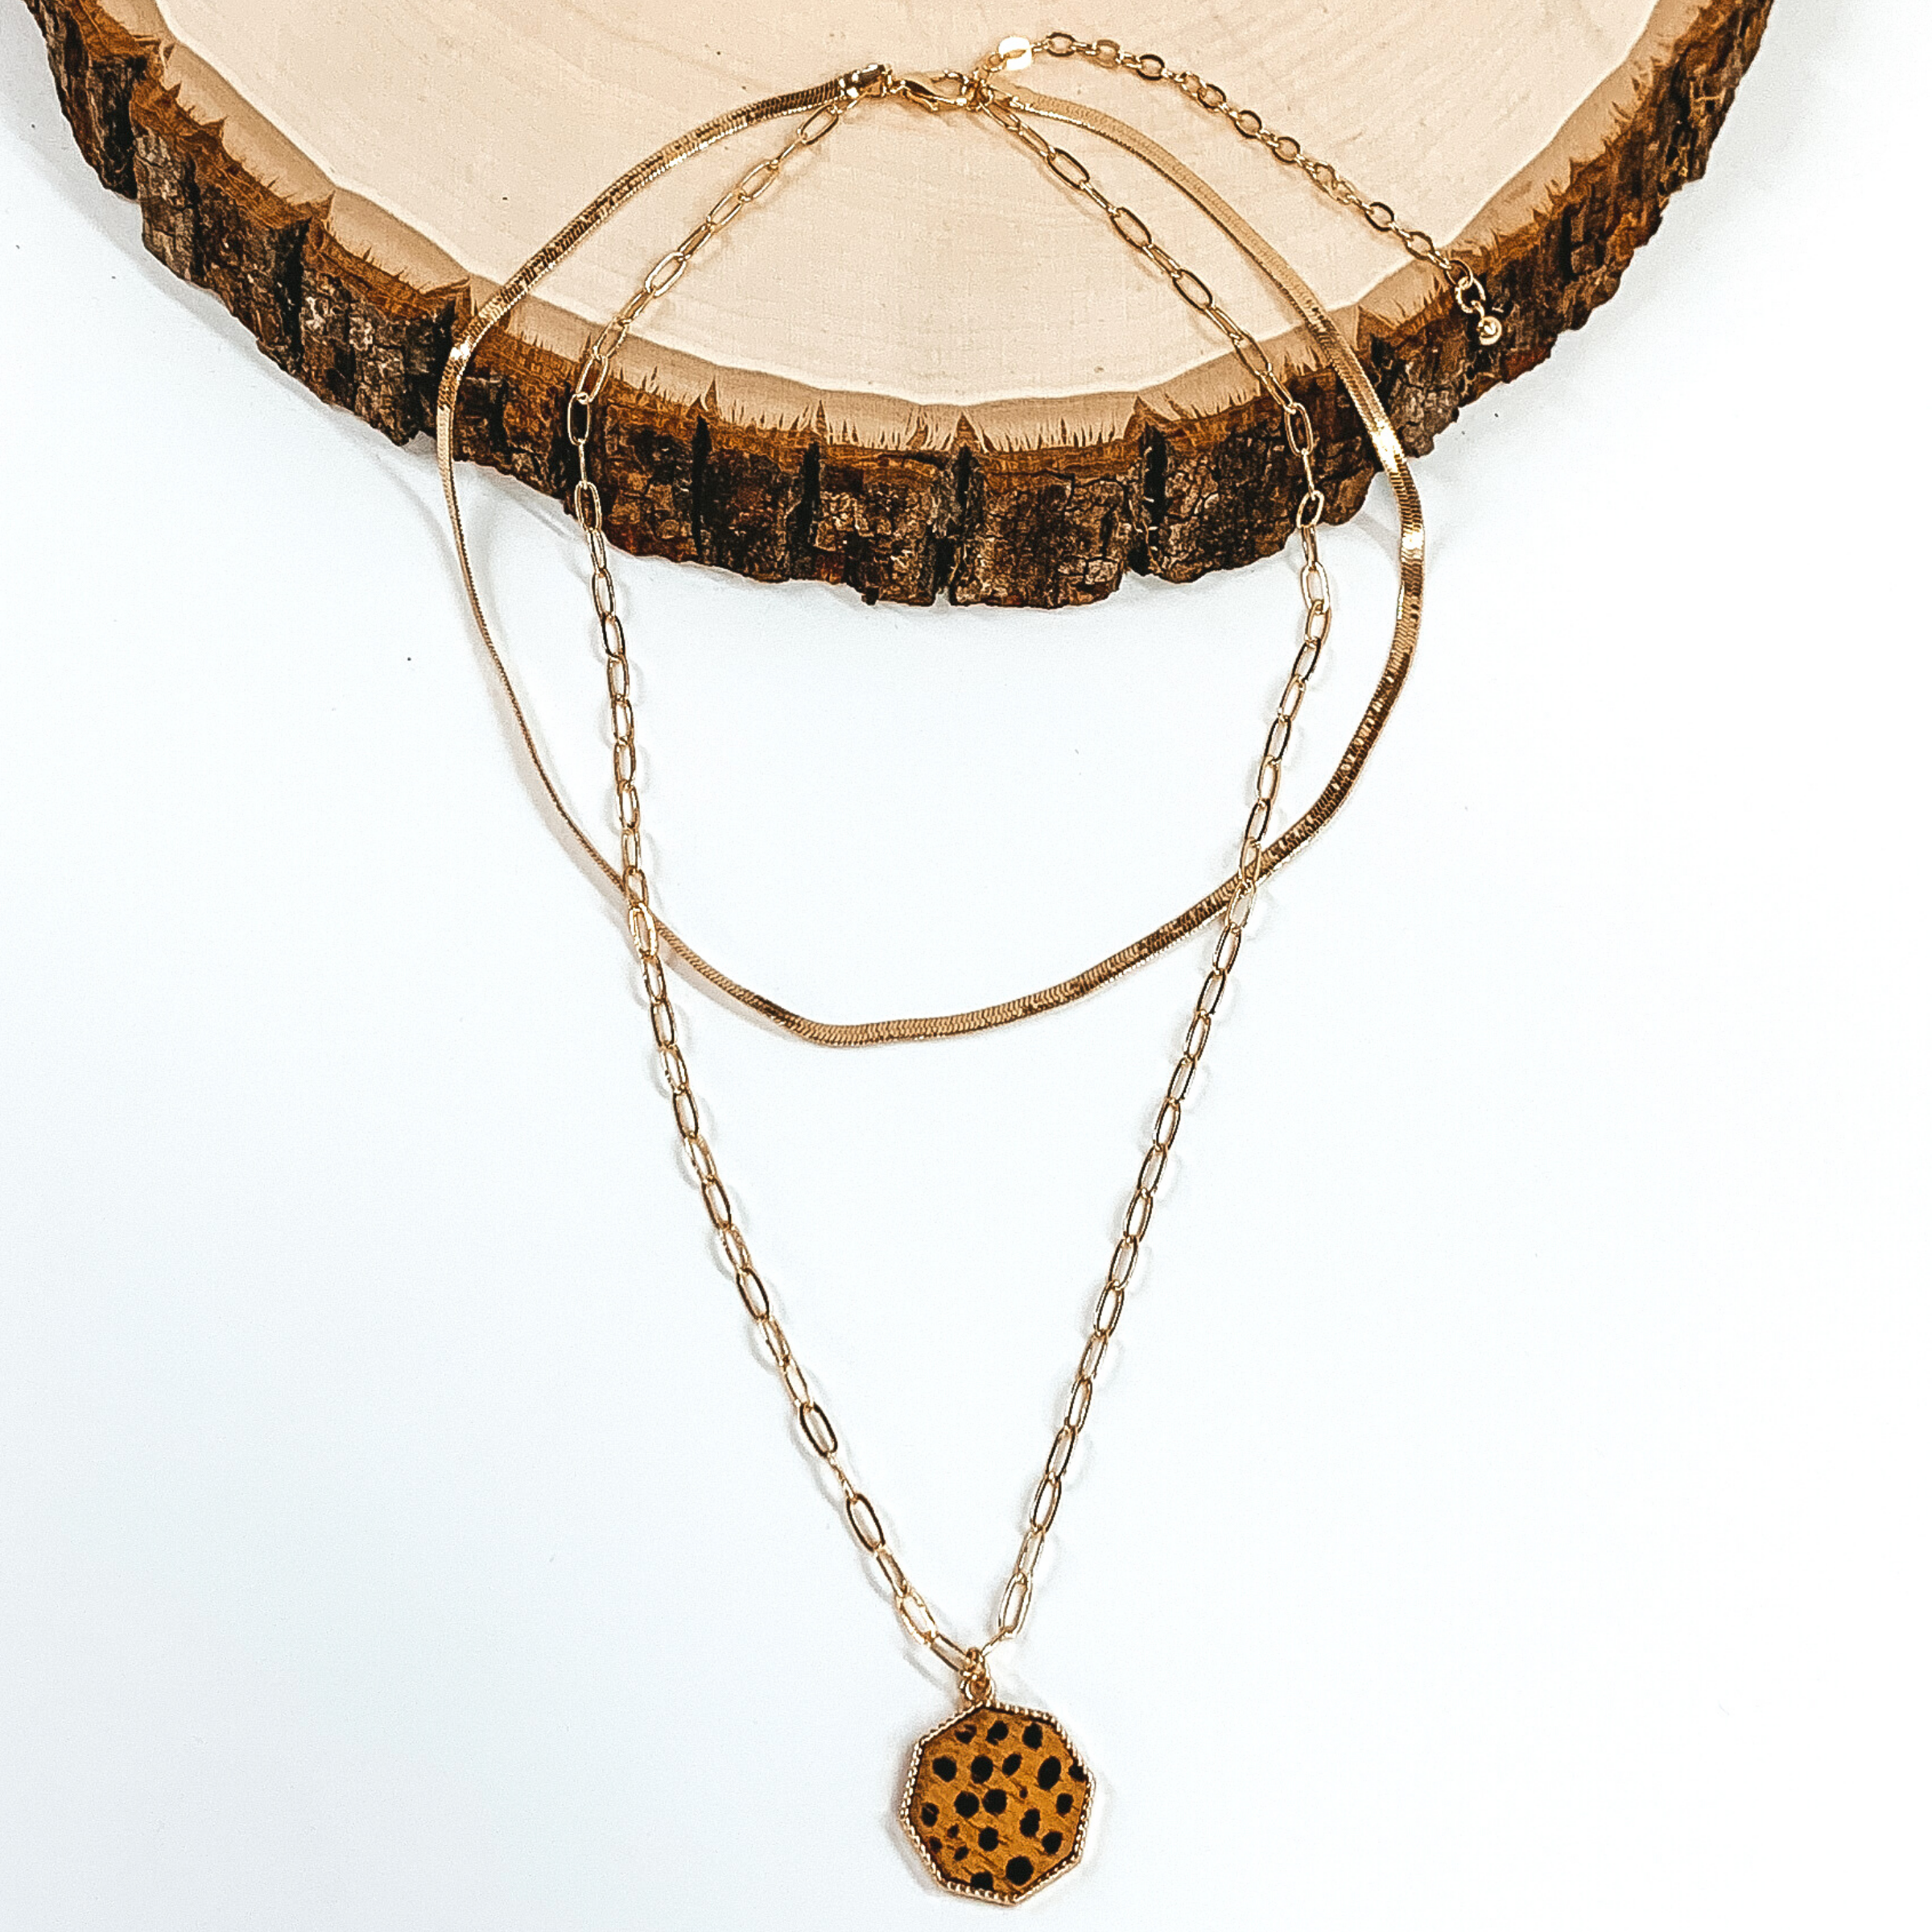 Gold paperclip doubled chain with an octagon pendant. The pendant has a brown hide inlay with a dotted print. This necklace is pictured laying on a piece of wood on a white background.